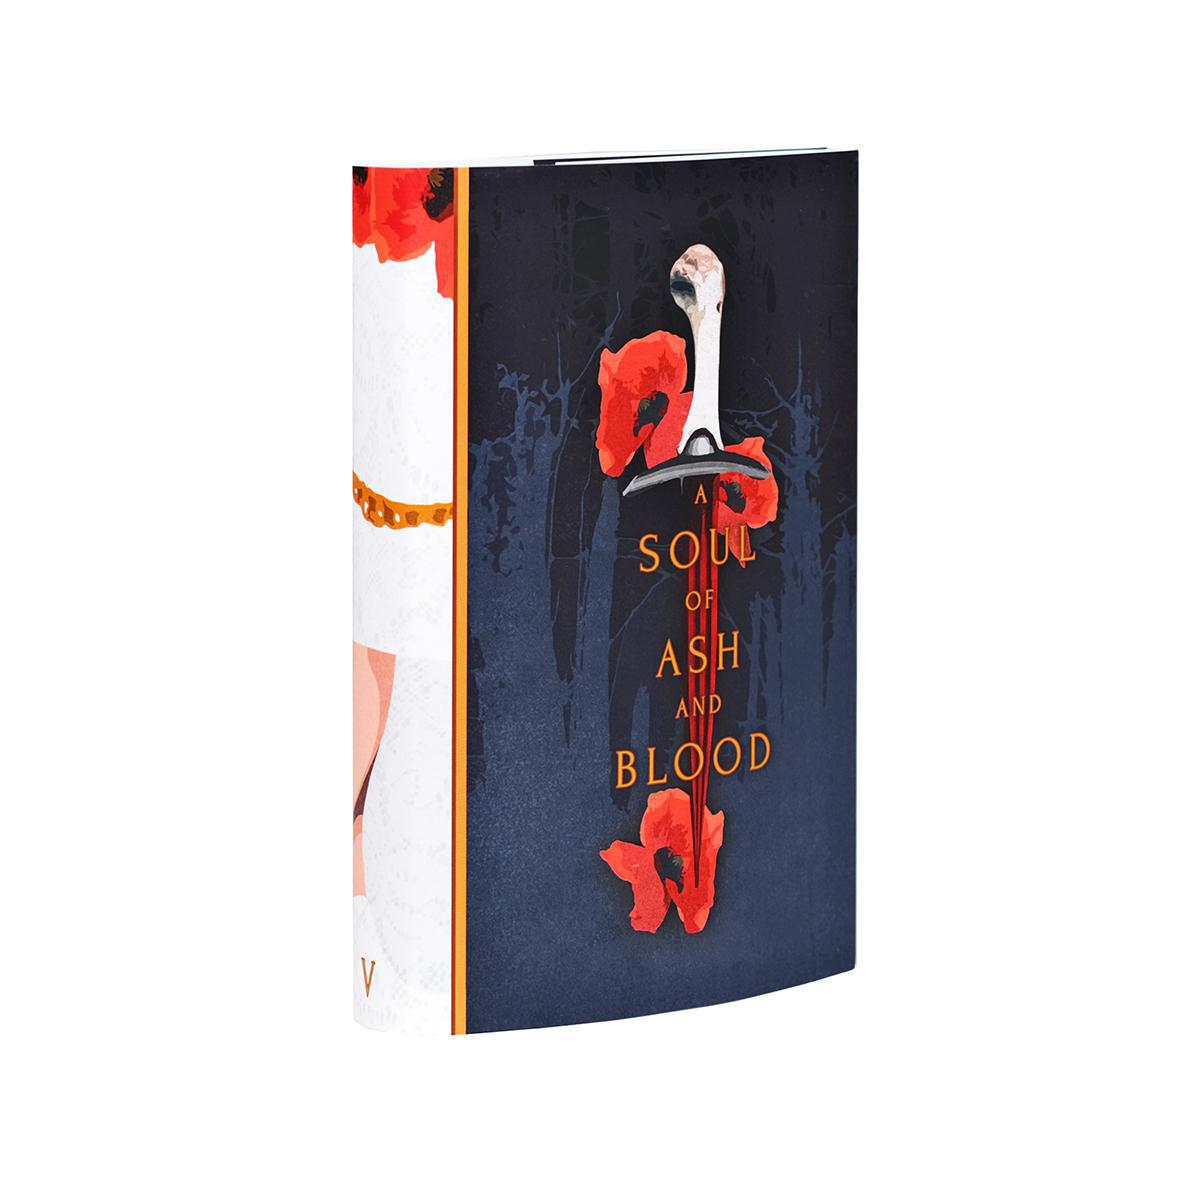 Customized Blood and Ash: A Soul of Ash and Blood - Single Book